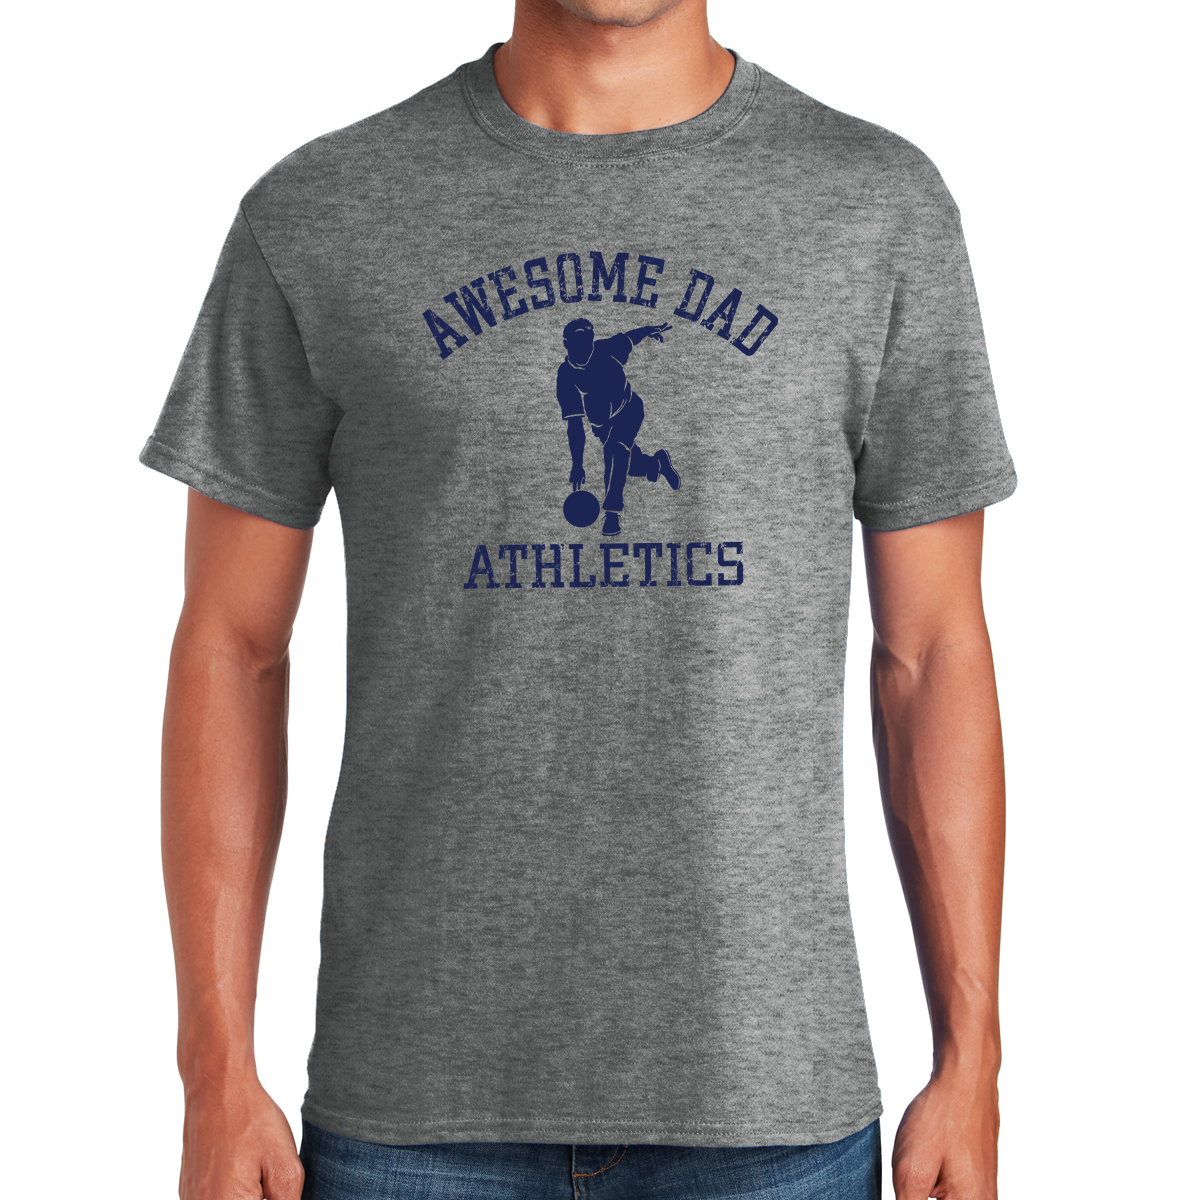 Awesome Dad Athletics Bowler Rolling Strikes in Style Gifts for Dads T-shirt